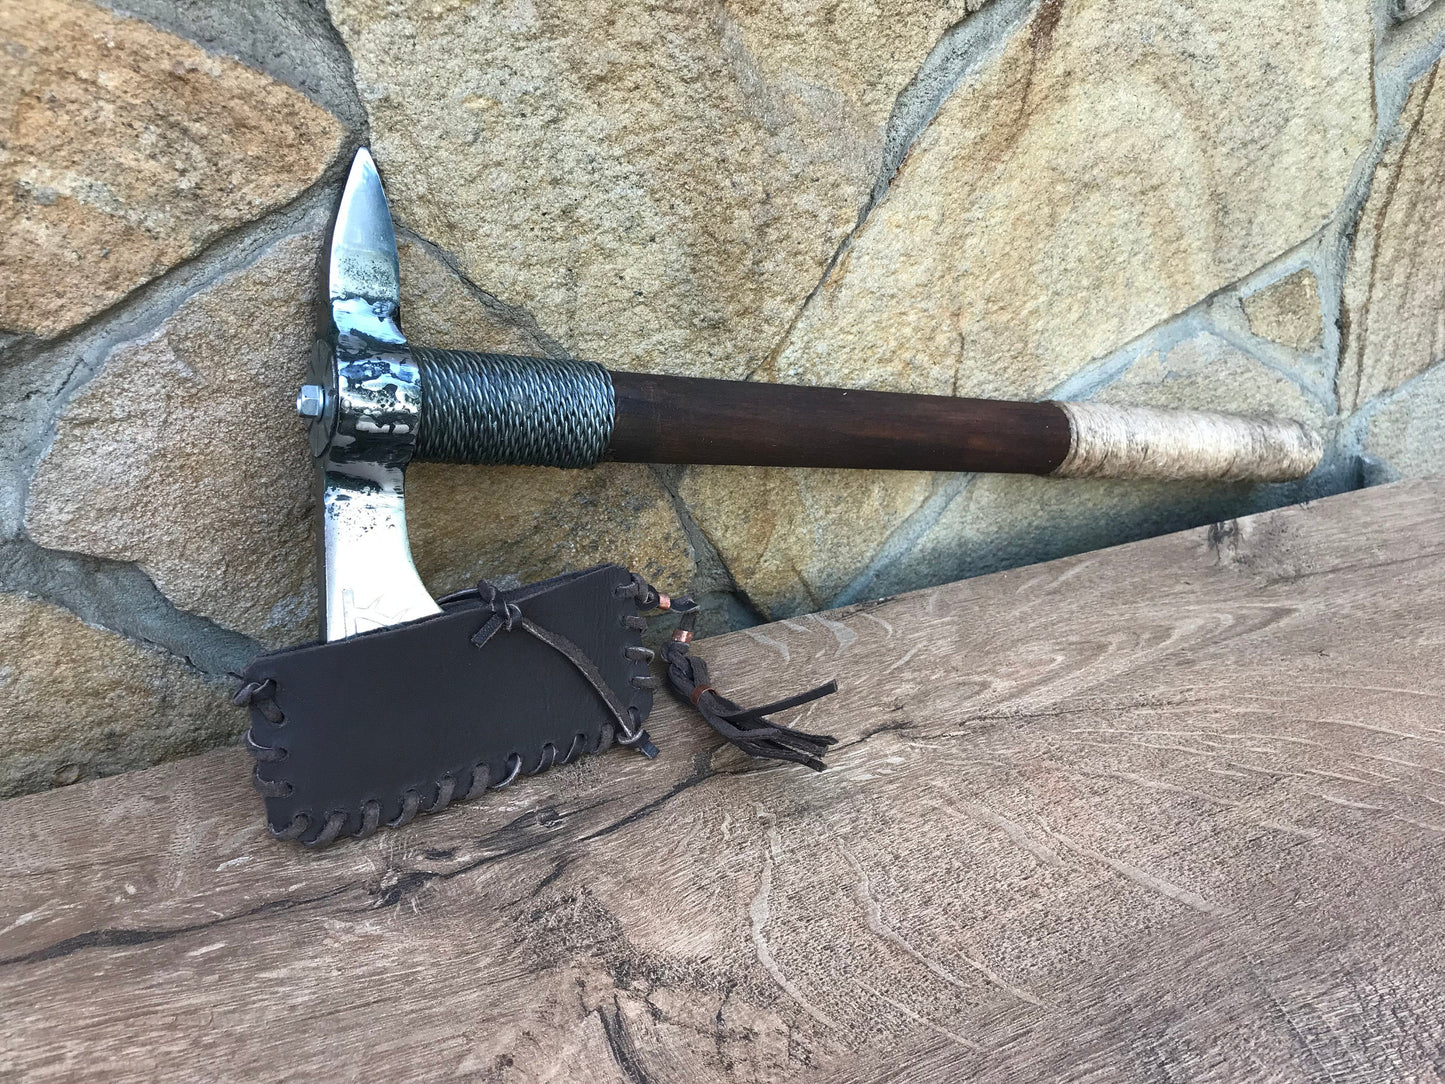 Mens gifts, viking axe, mens gift, tomahawk, man gifts, handyman tool, manly gift, axe, gifts for men, bearded axe, gifts for man, Kratos